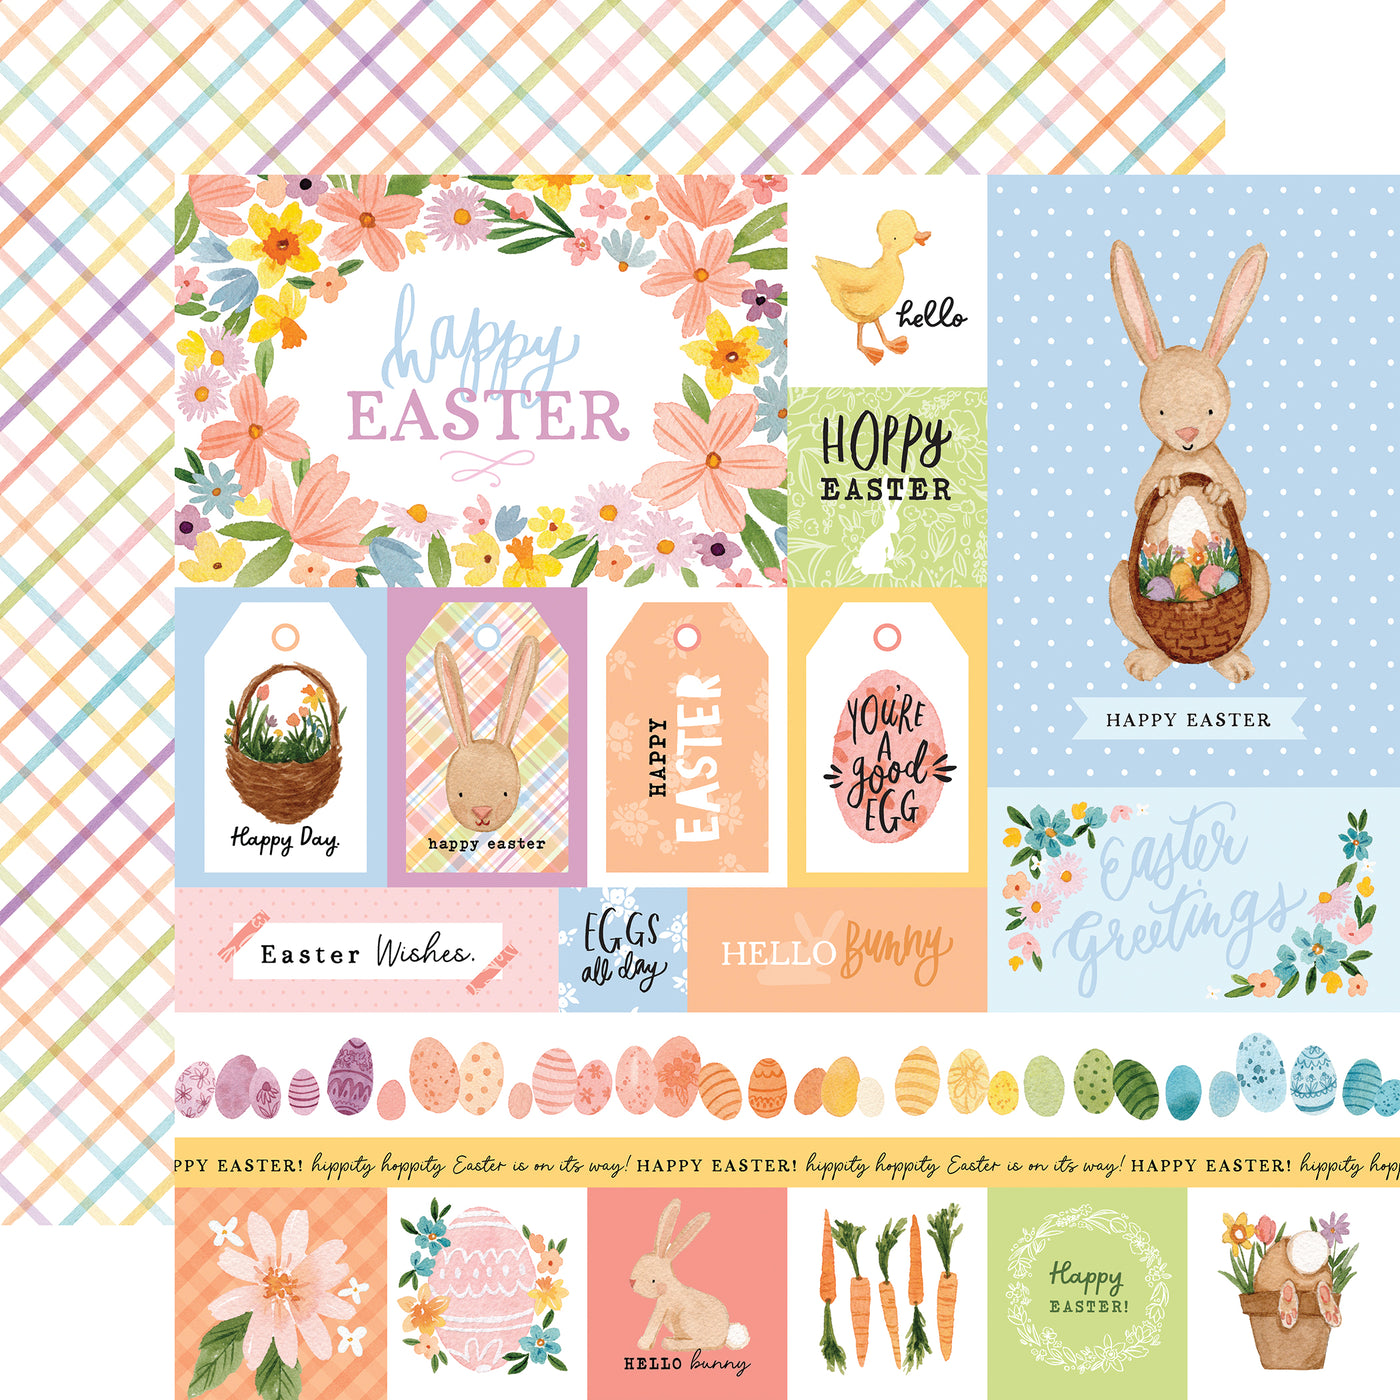 The front side of this paper has multi journaling cards and has adorable Easter images along with border pieces, tags, frames that can be added to lots of different projects. The reverse side of the paper is a diagonal plaid made up of all the pastel colors used in this collection. 